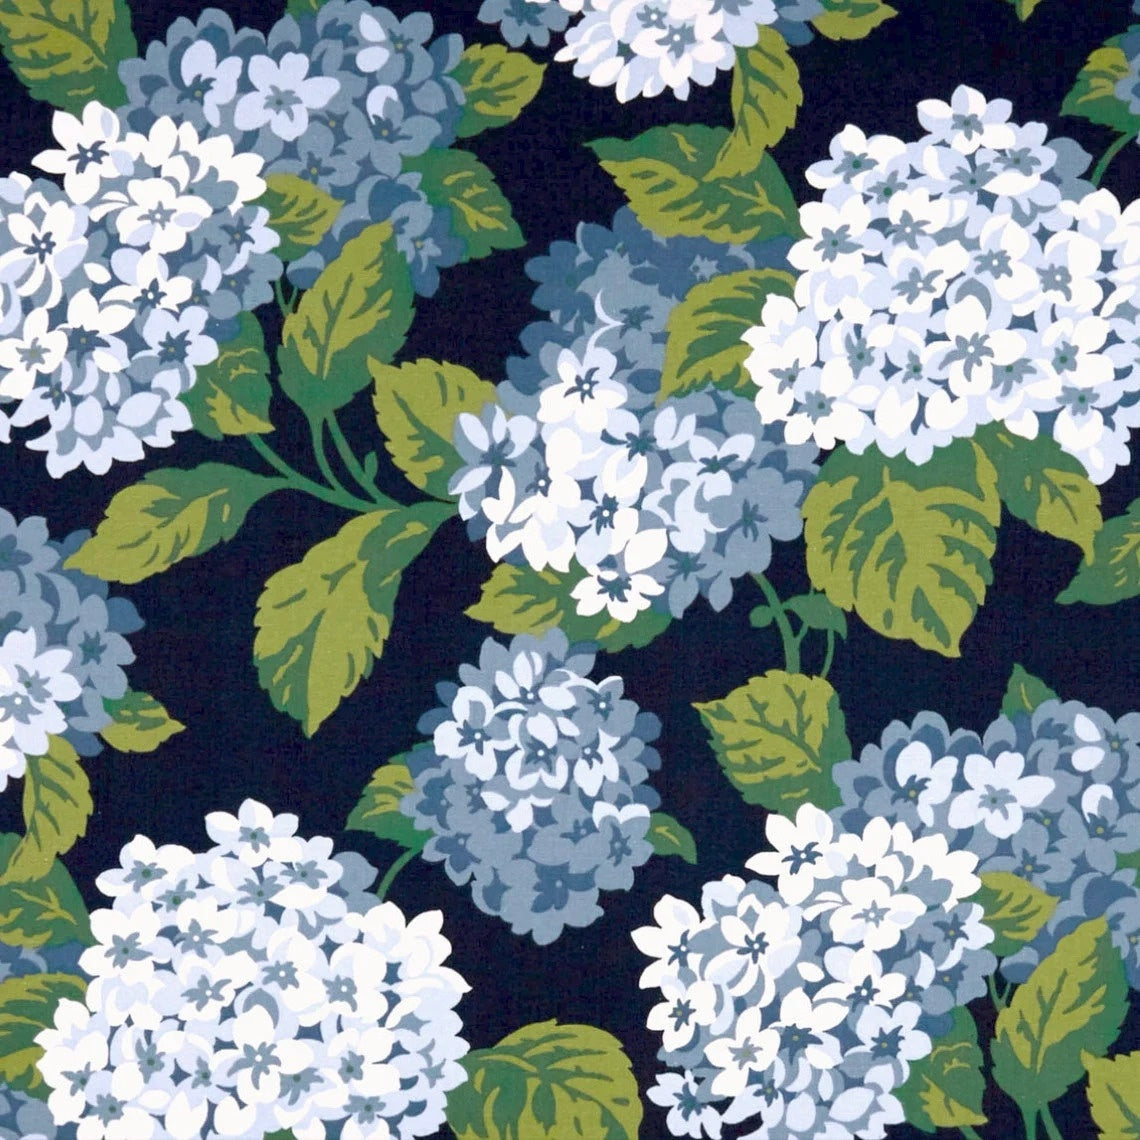 empress swag valance in summerwind navy blue hydrangea floral, large scale